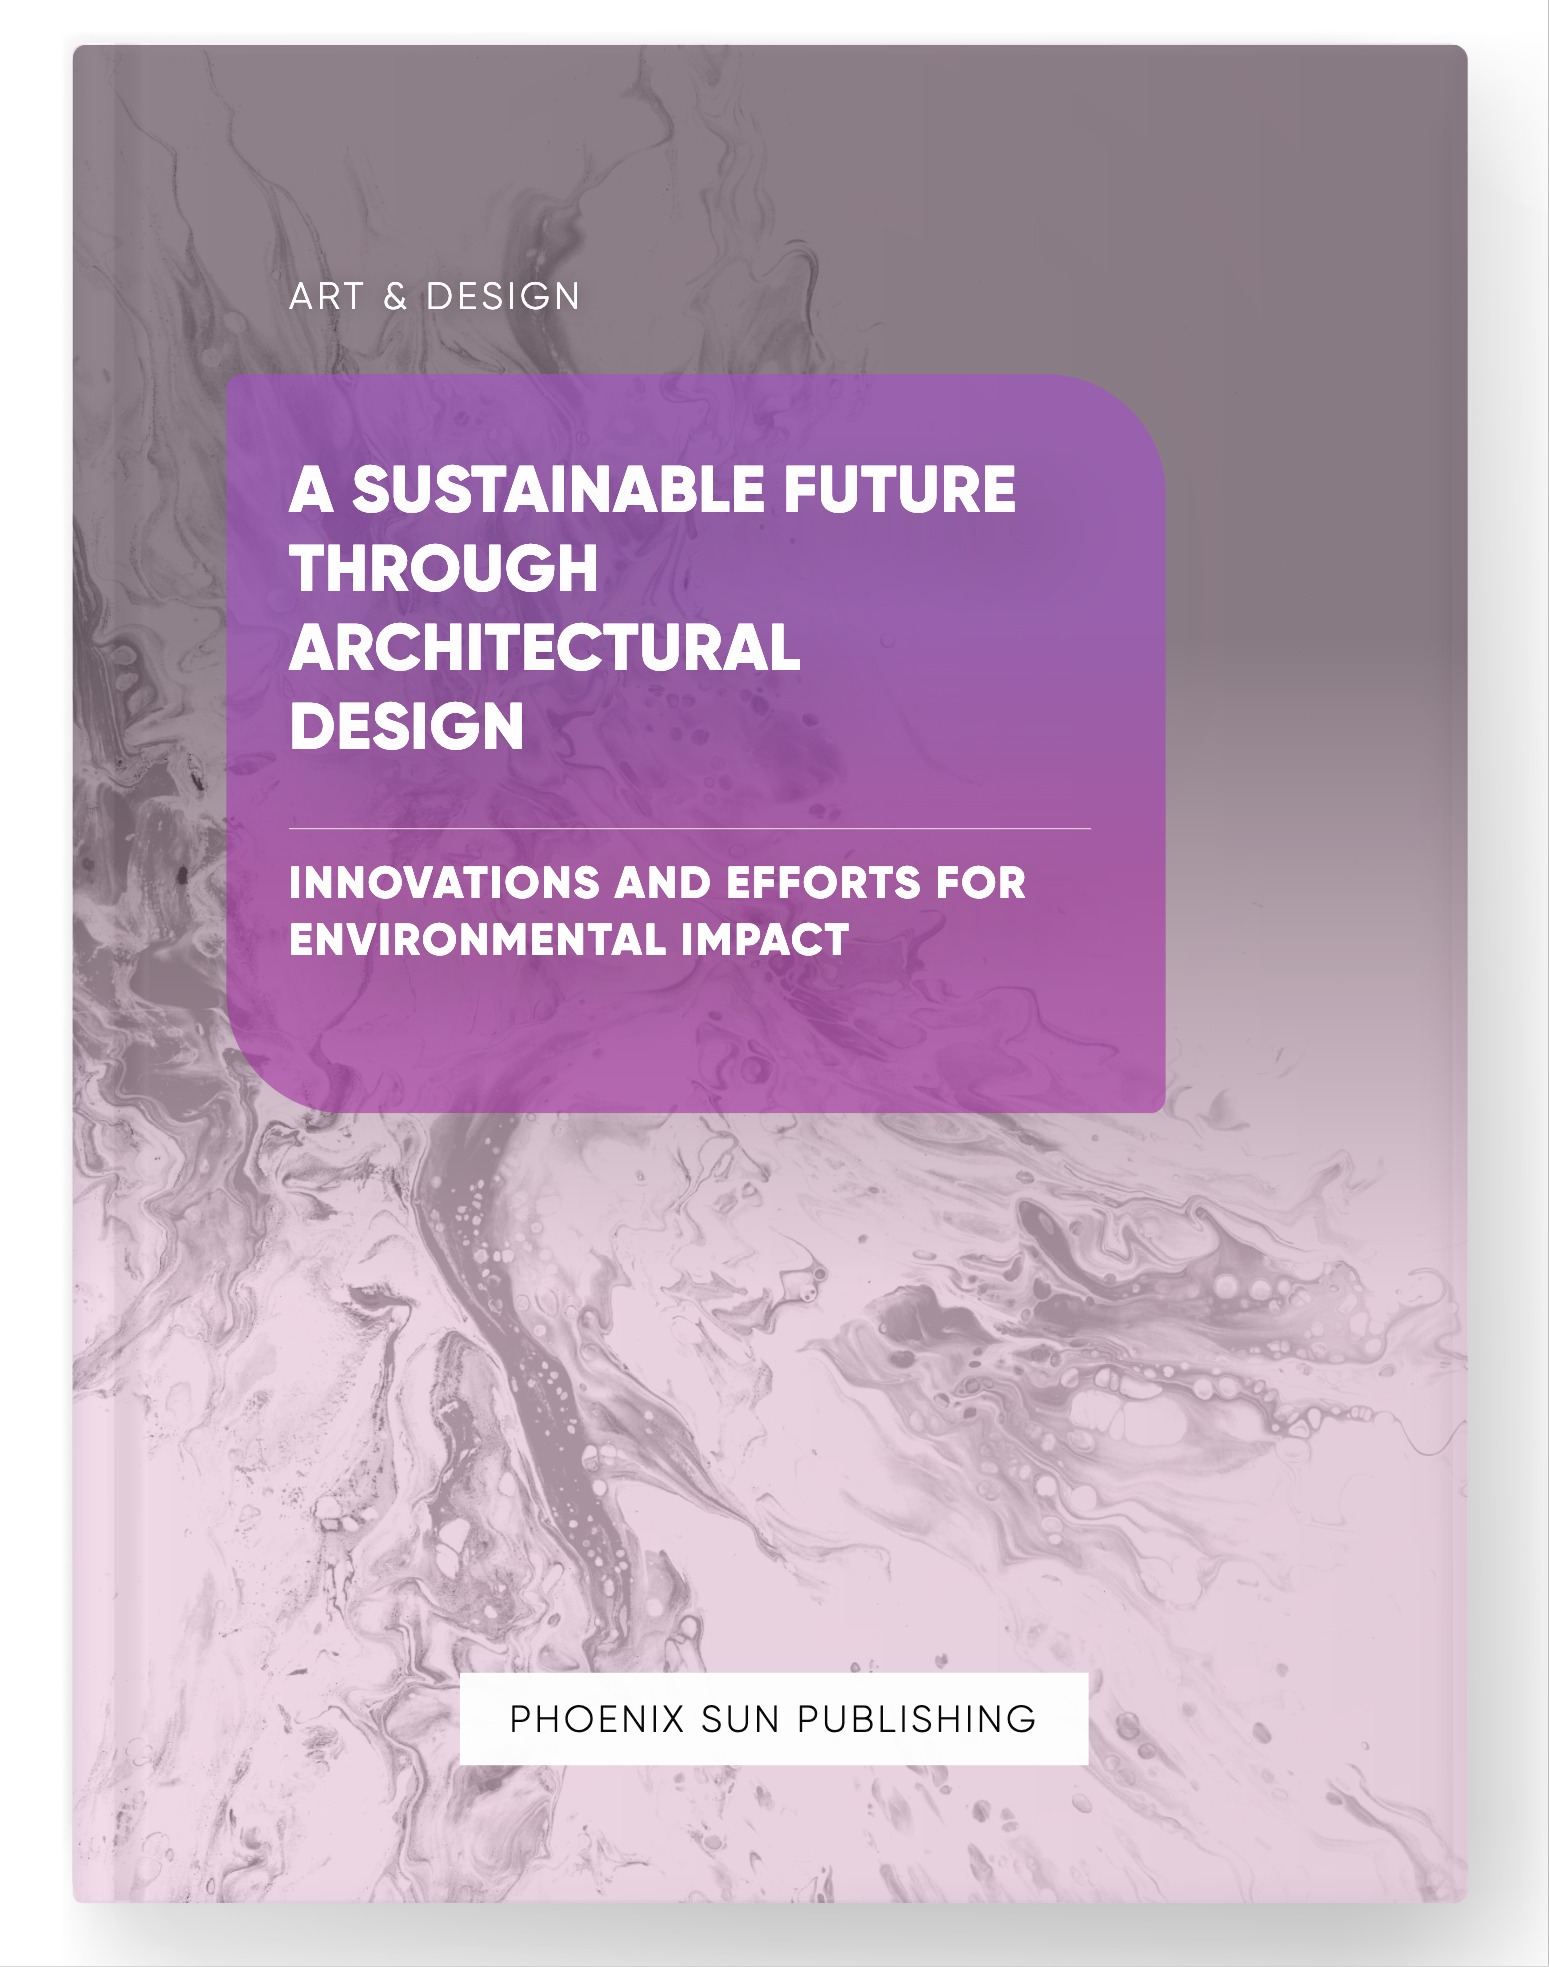 A Sustainable Future through Architectural Design – Innovations and Efforts for Environmental Impact